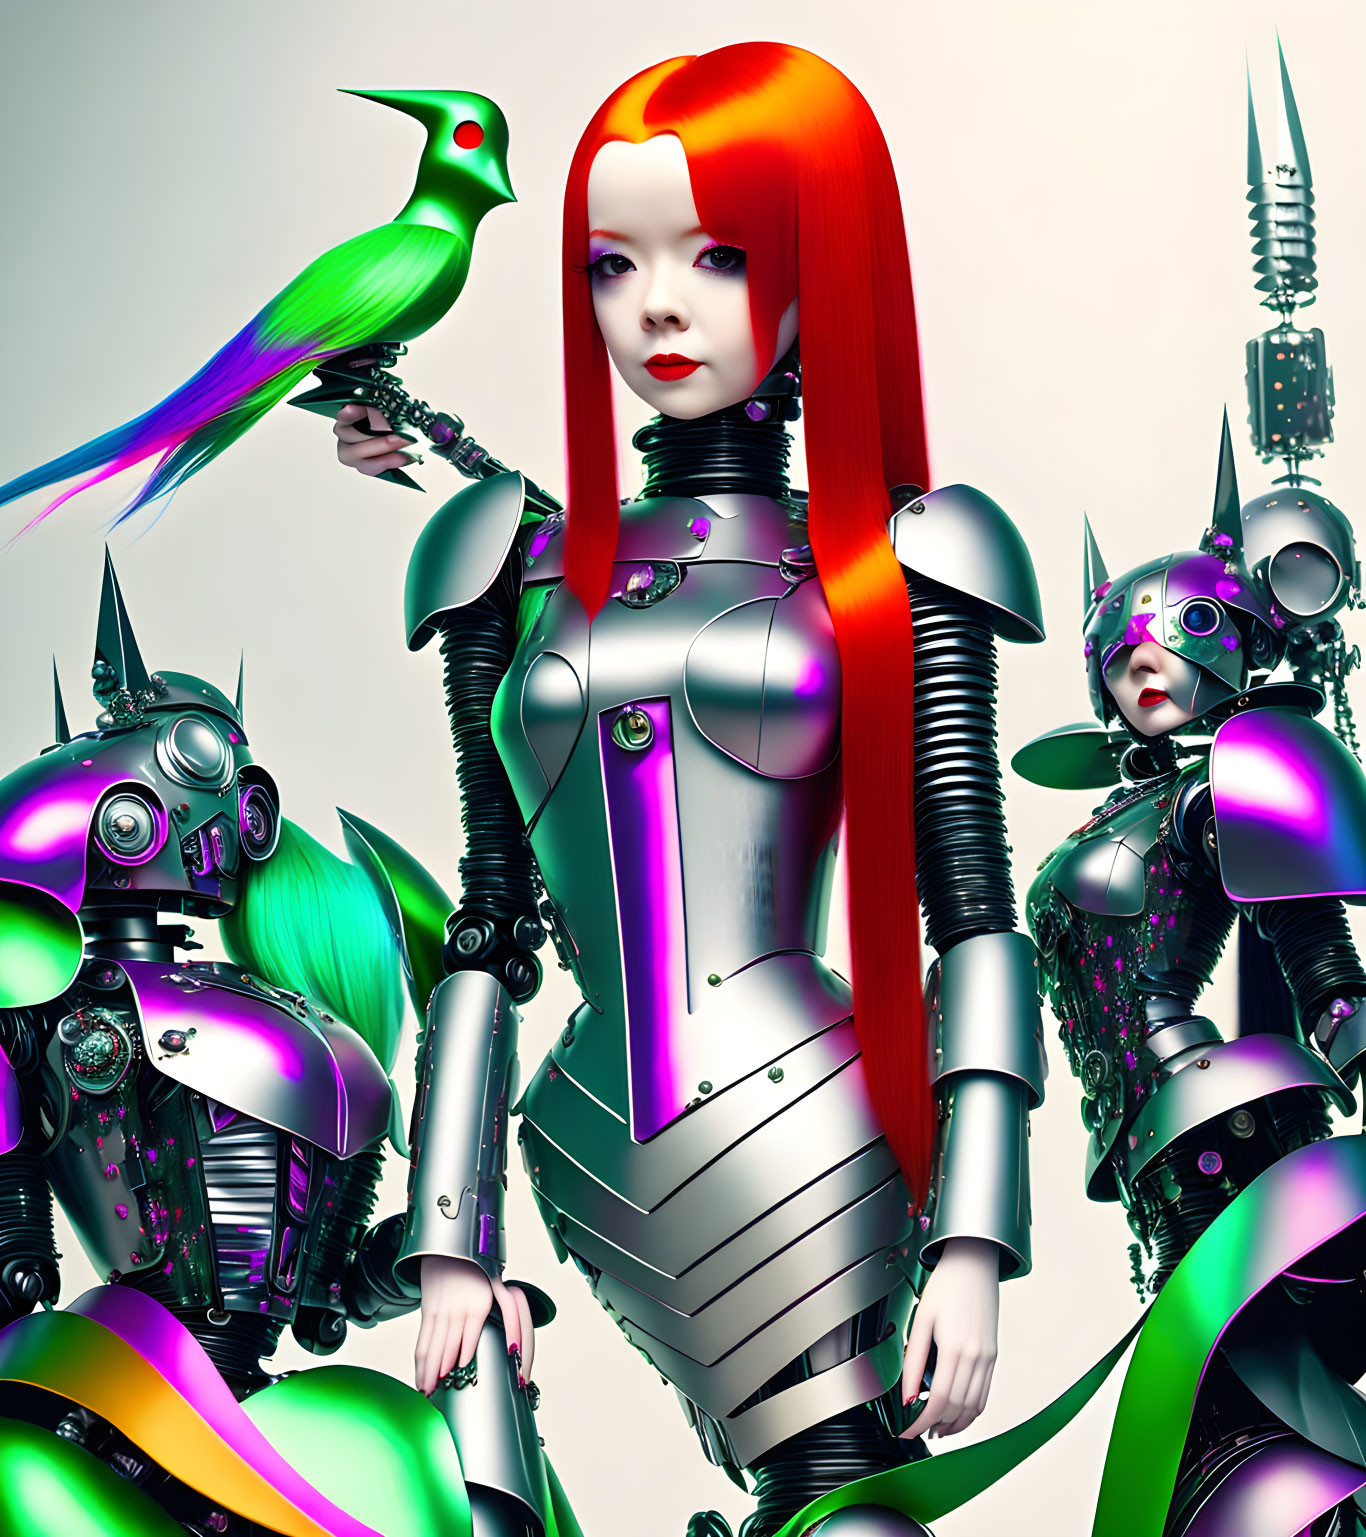 Futuristic red-haired female android with green bird and robotic companions on pale background